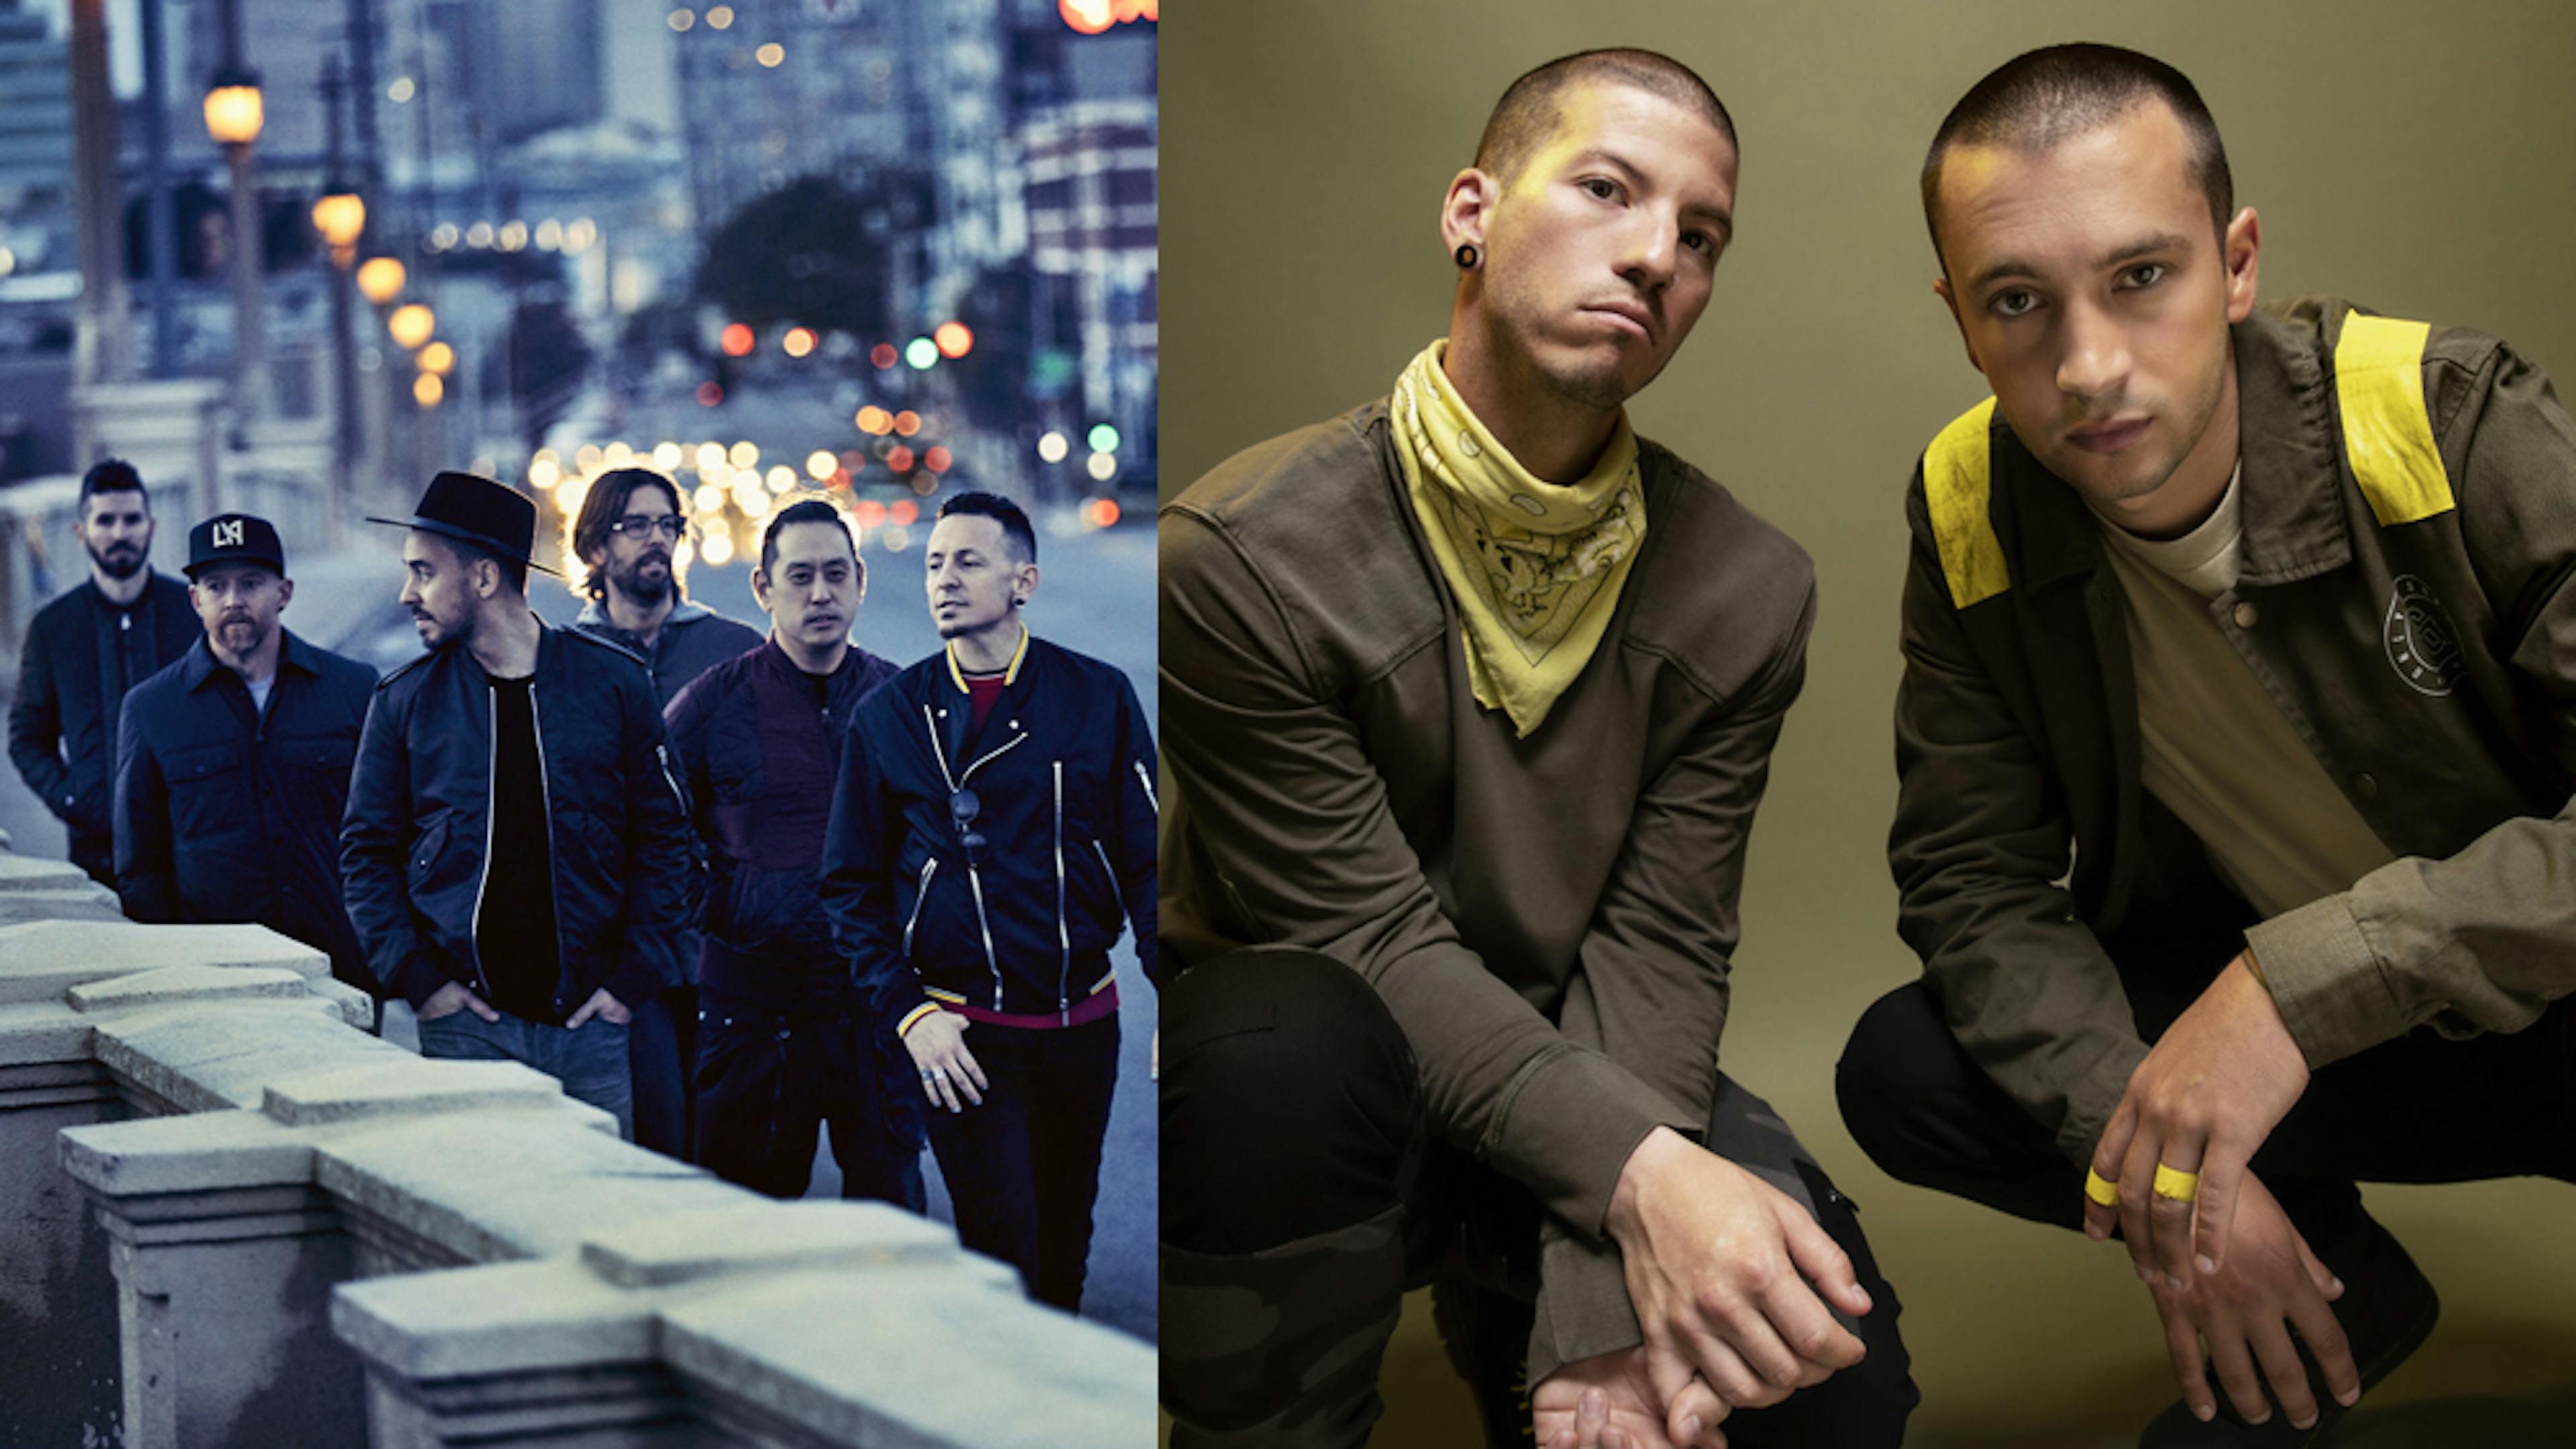 Here's A Surprise Mash-Up Featuring Linkin Park And twenty one pilots